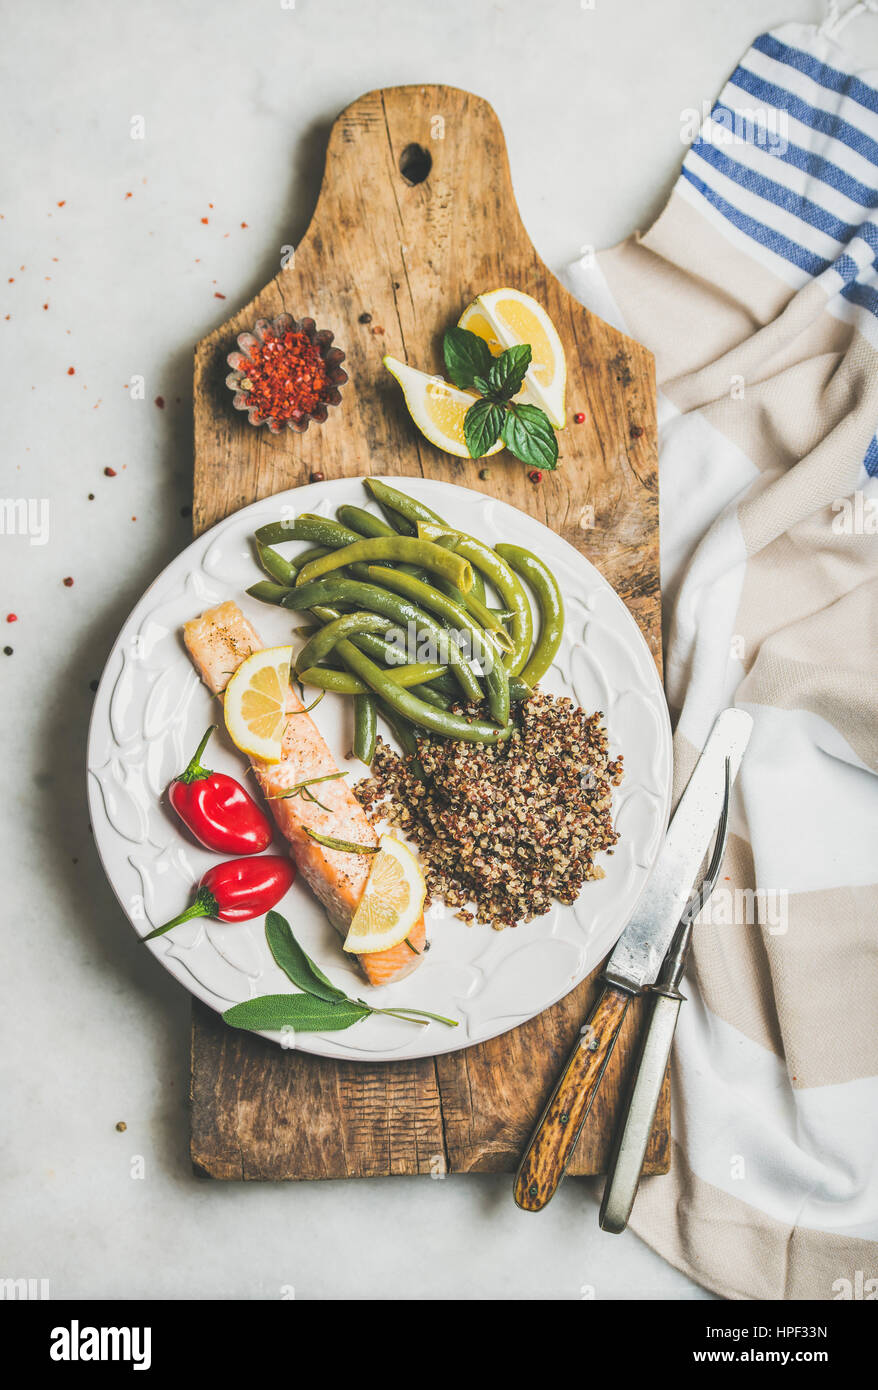 Healthy protein rich dinner plate. Oven roasted salmon fillet with multicolored quinoa, chilli pepper and poached green beans on rustic wooden board o Stock Photo